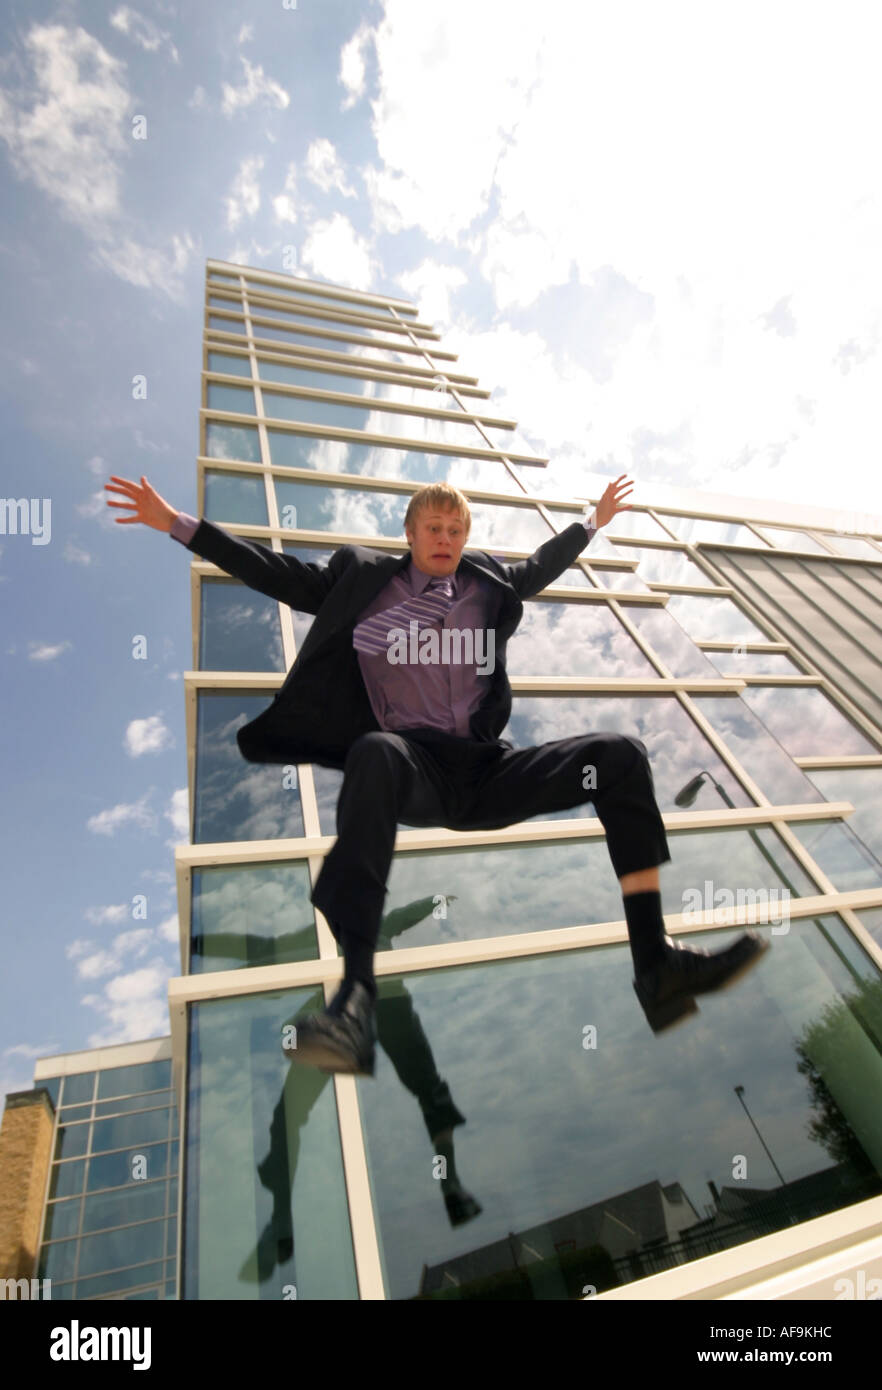 A Stock Photograph of a Young Adult Businessman Jumping from the Top of a Modern Office Block Stock Photo